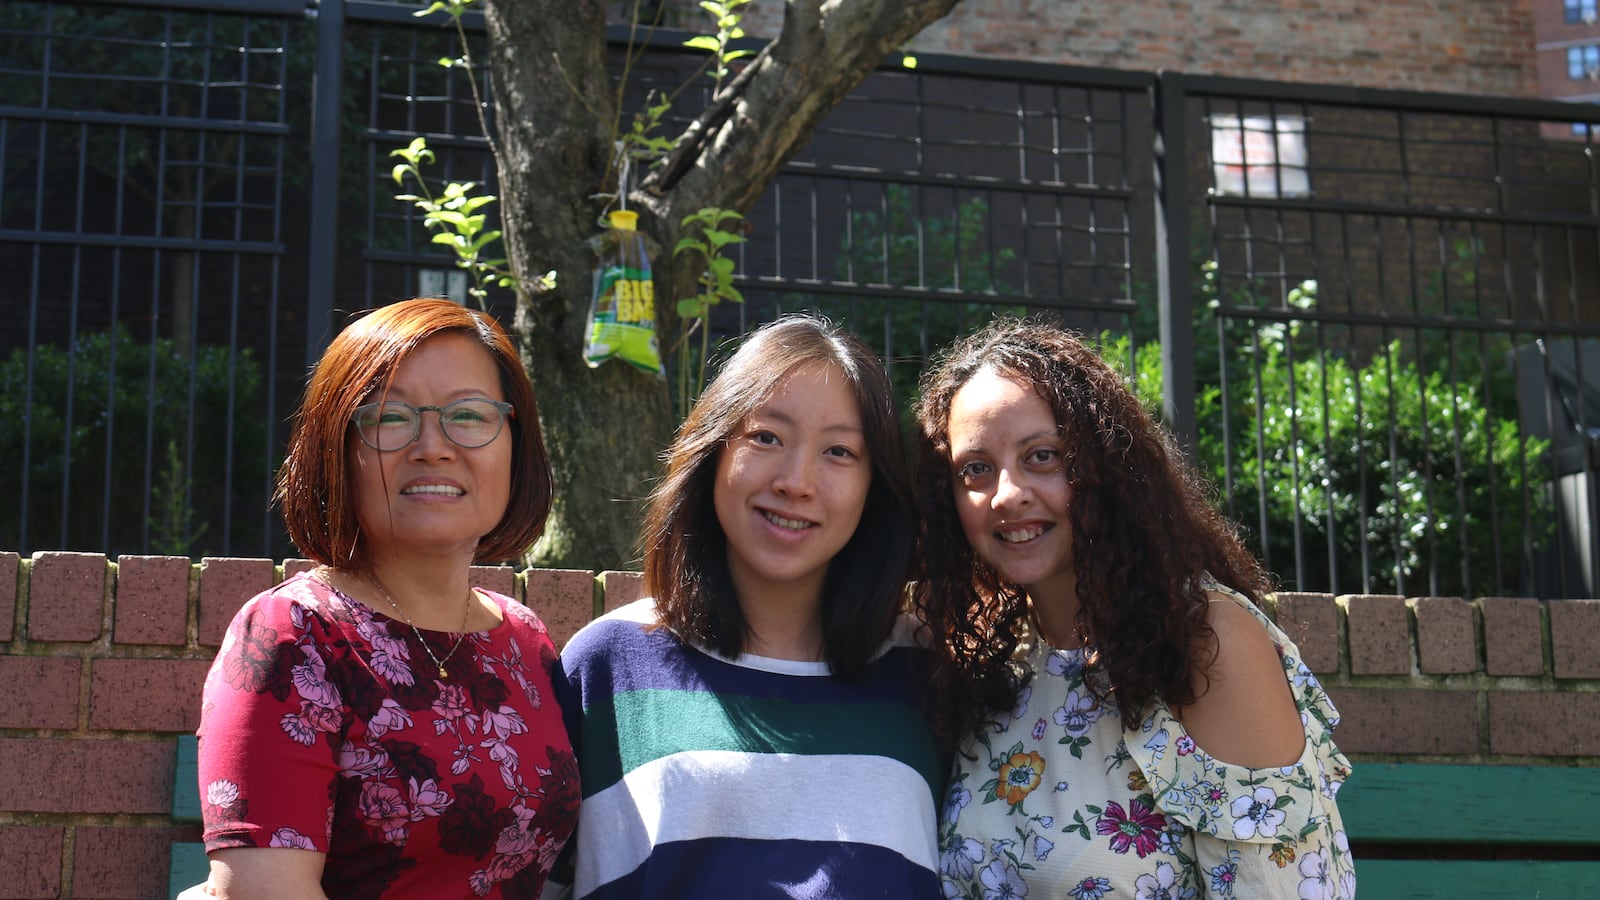 Preschools like Little Star of Broome Street can be a vital link for immigrant families. Teachers Marnie Montalvo, right, and Jenny Wang, left, along with center director Annie Lei, center, work to build trust with their immigrant families.